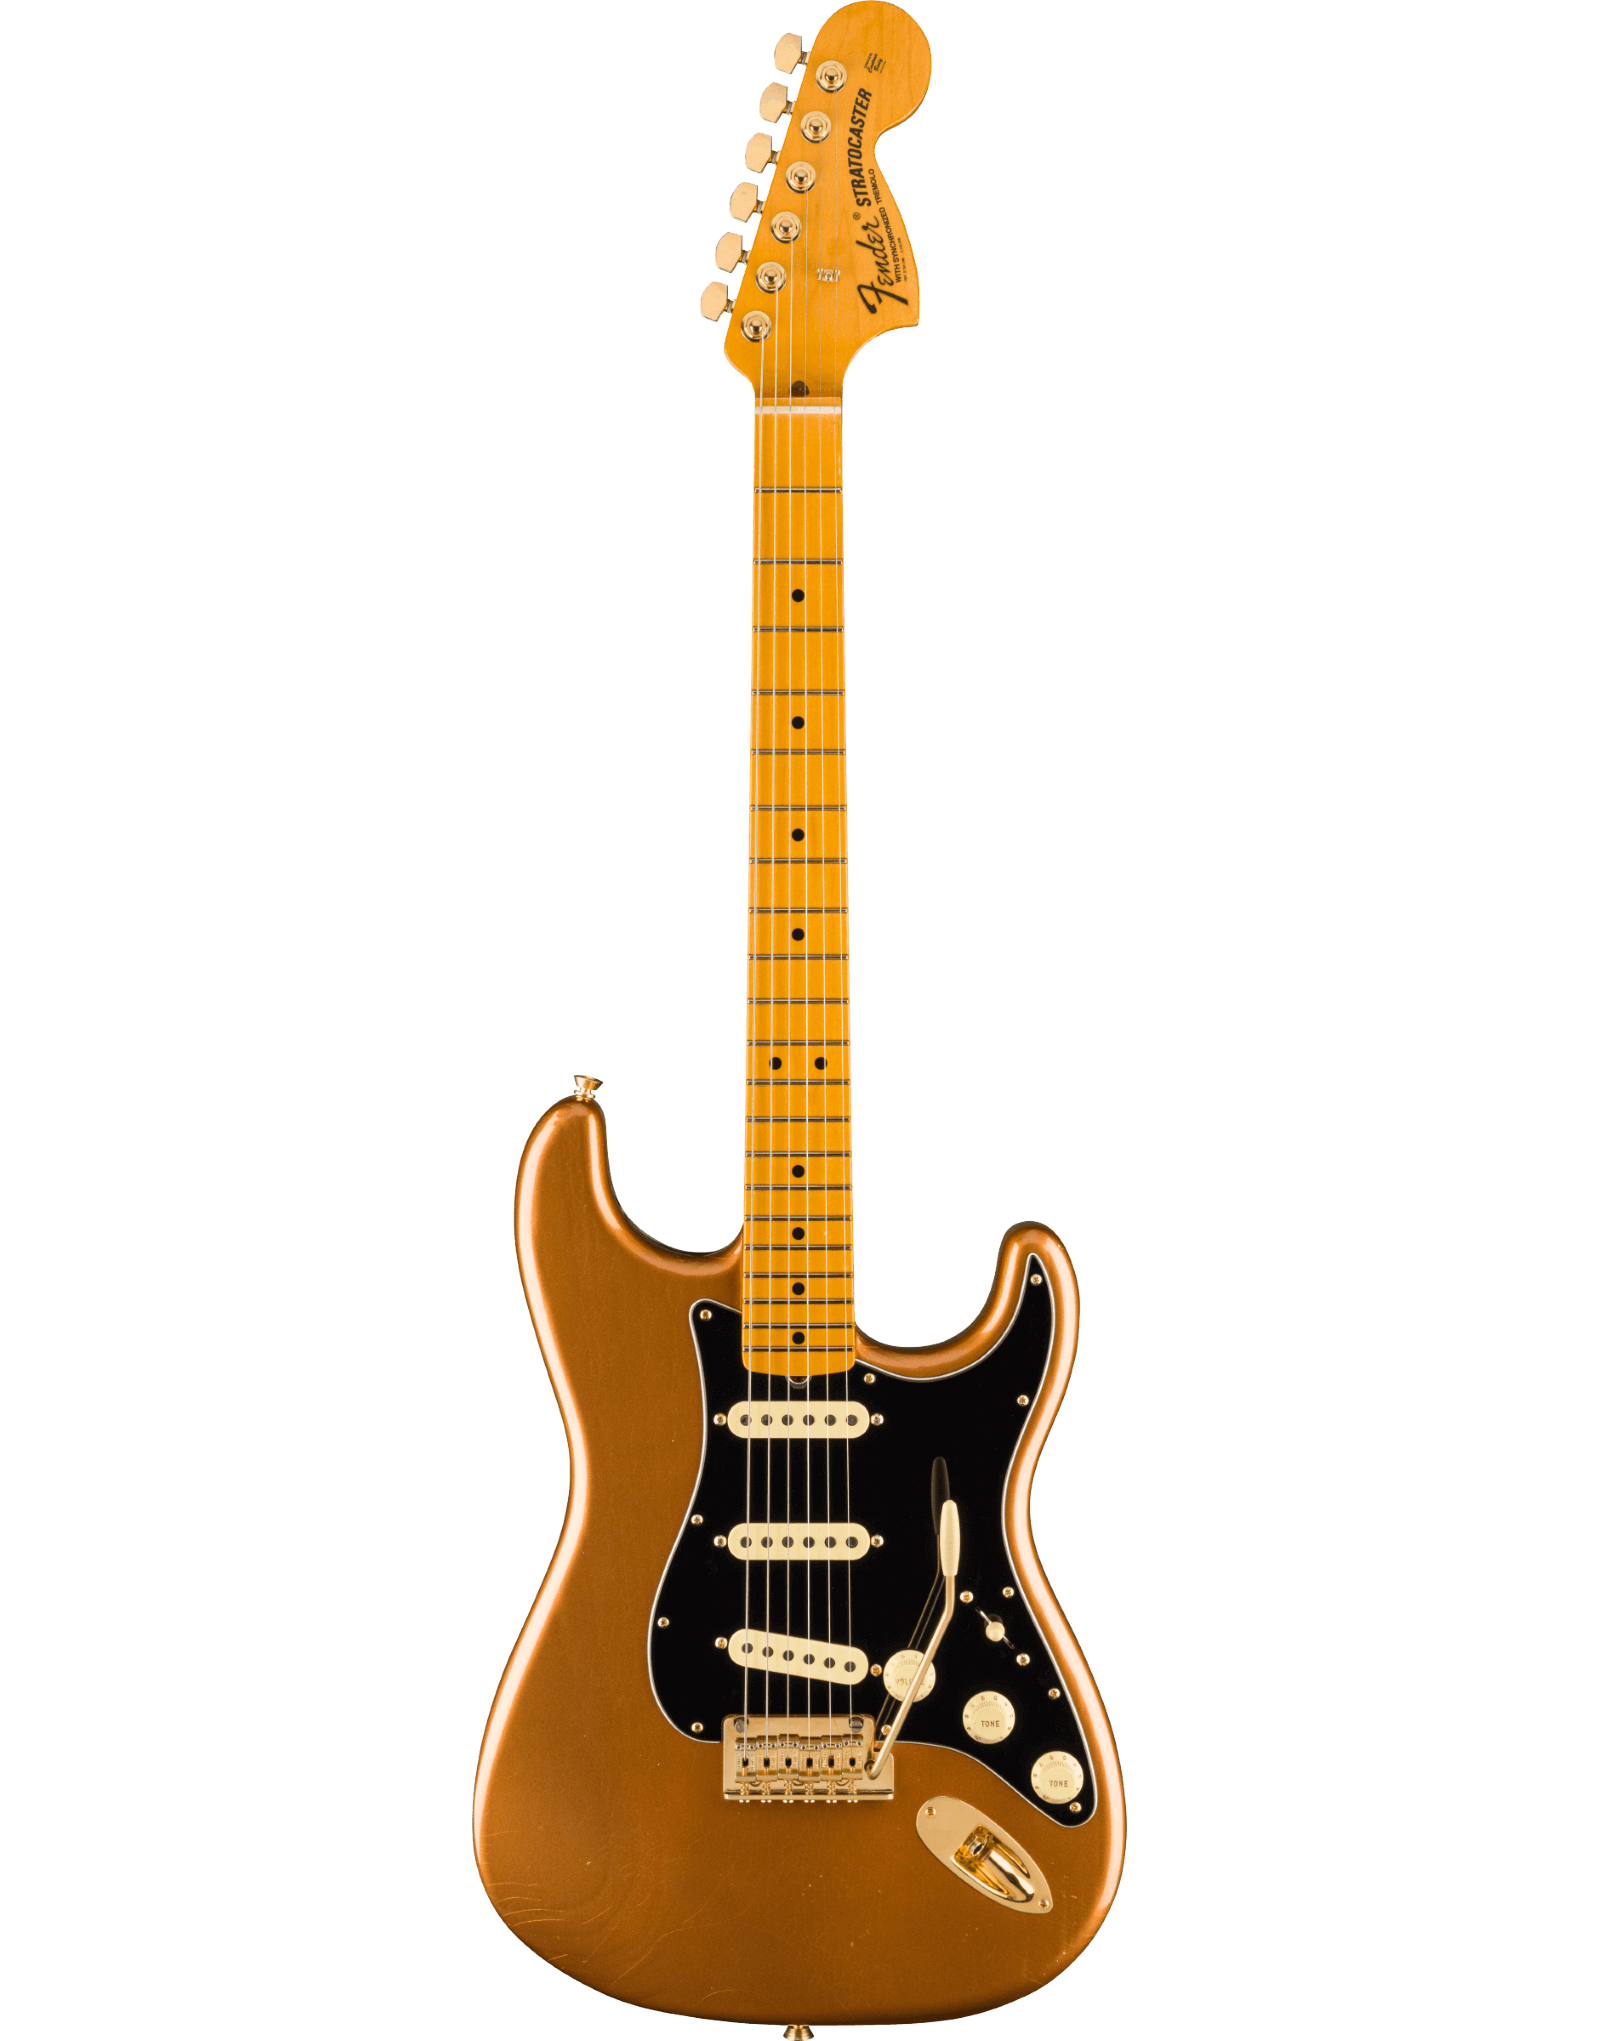 Fender Stratocaster HSS Pickguard shown in Flame Maple, please state one or  two hole above humbucker.